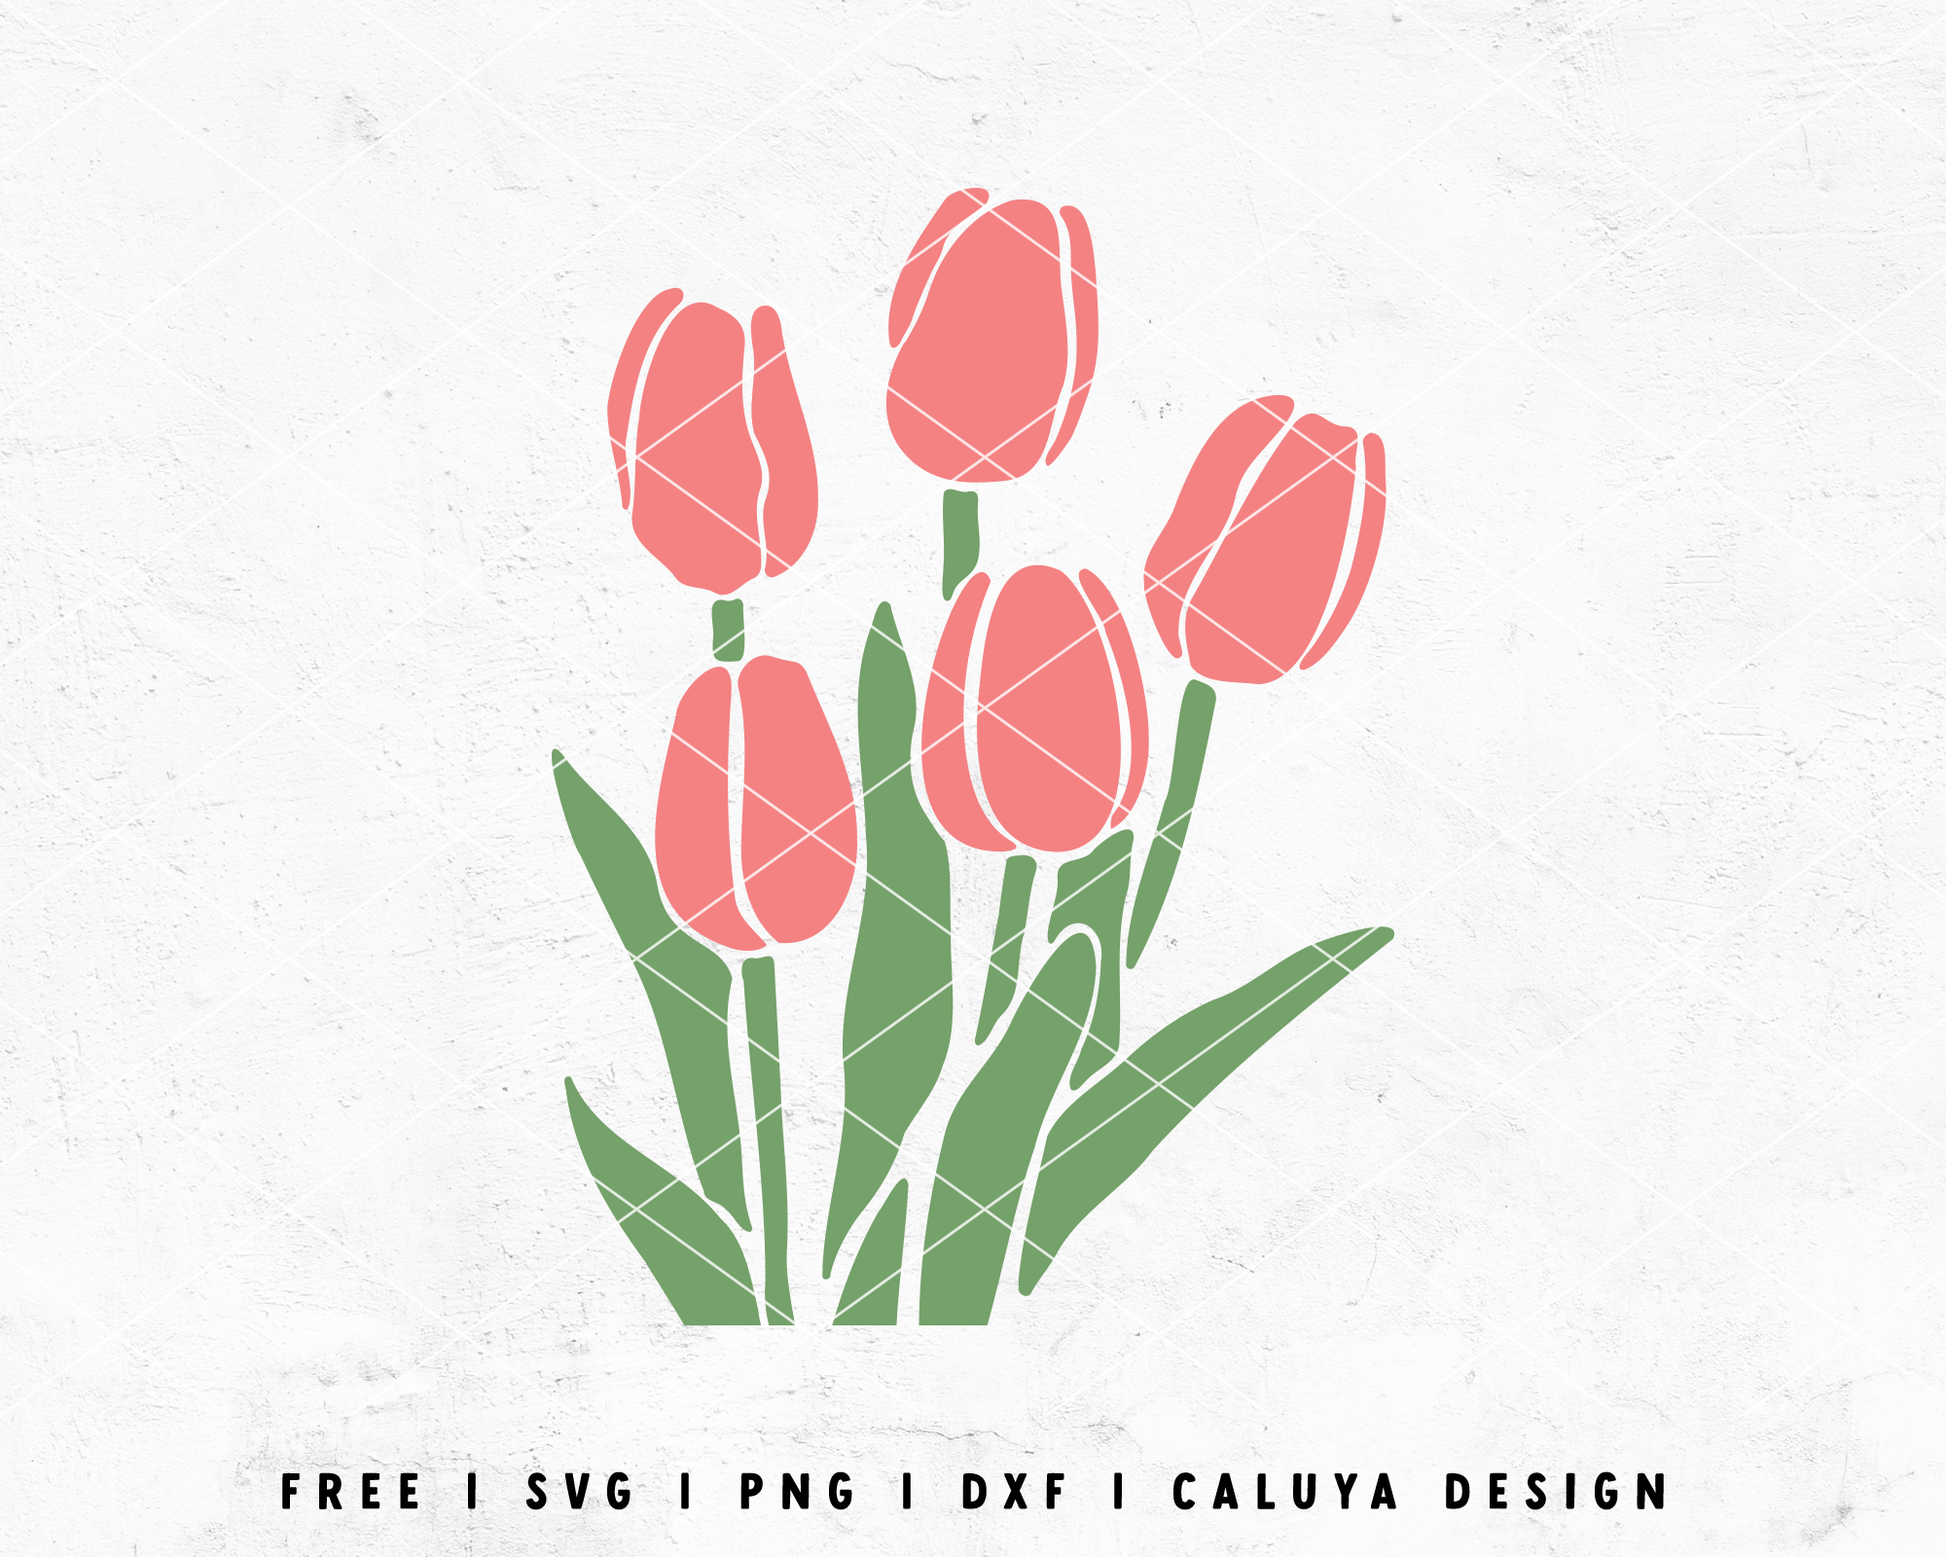 FREE Tulip SVG | Spring Flower SVG Cut File for Cricut, Cameo Silhouette | Free SVG Cut File